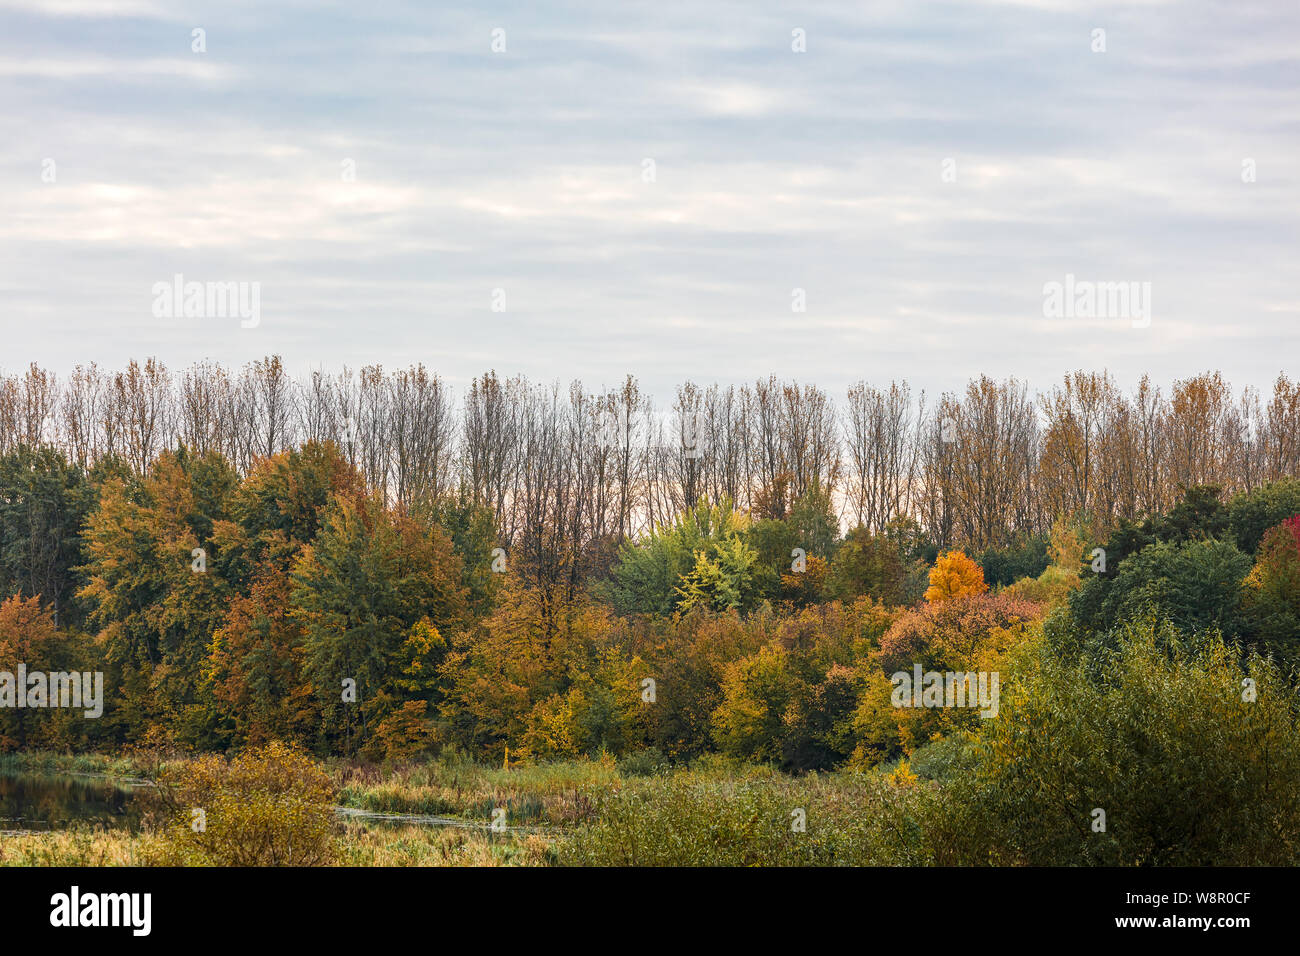 natural landscape view during fall season. autumnal trees and bushes view against grey sky background Stock Photo